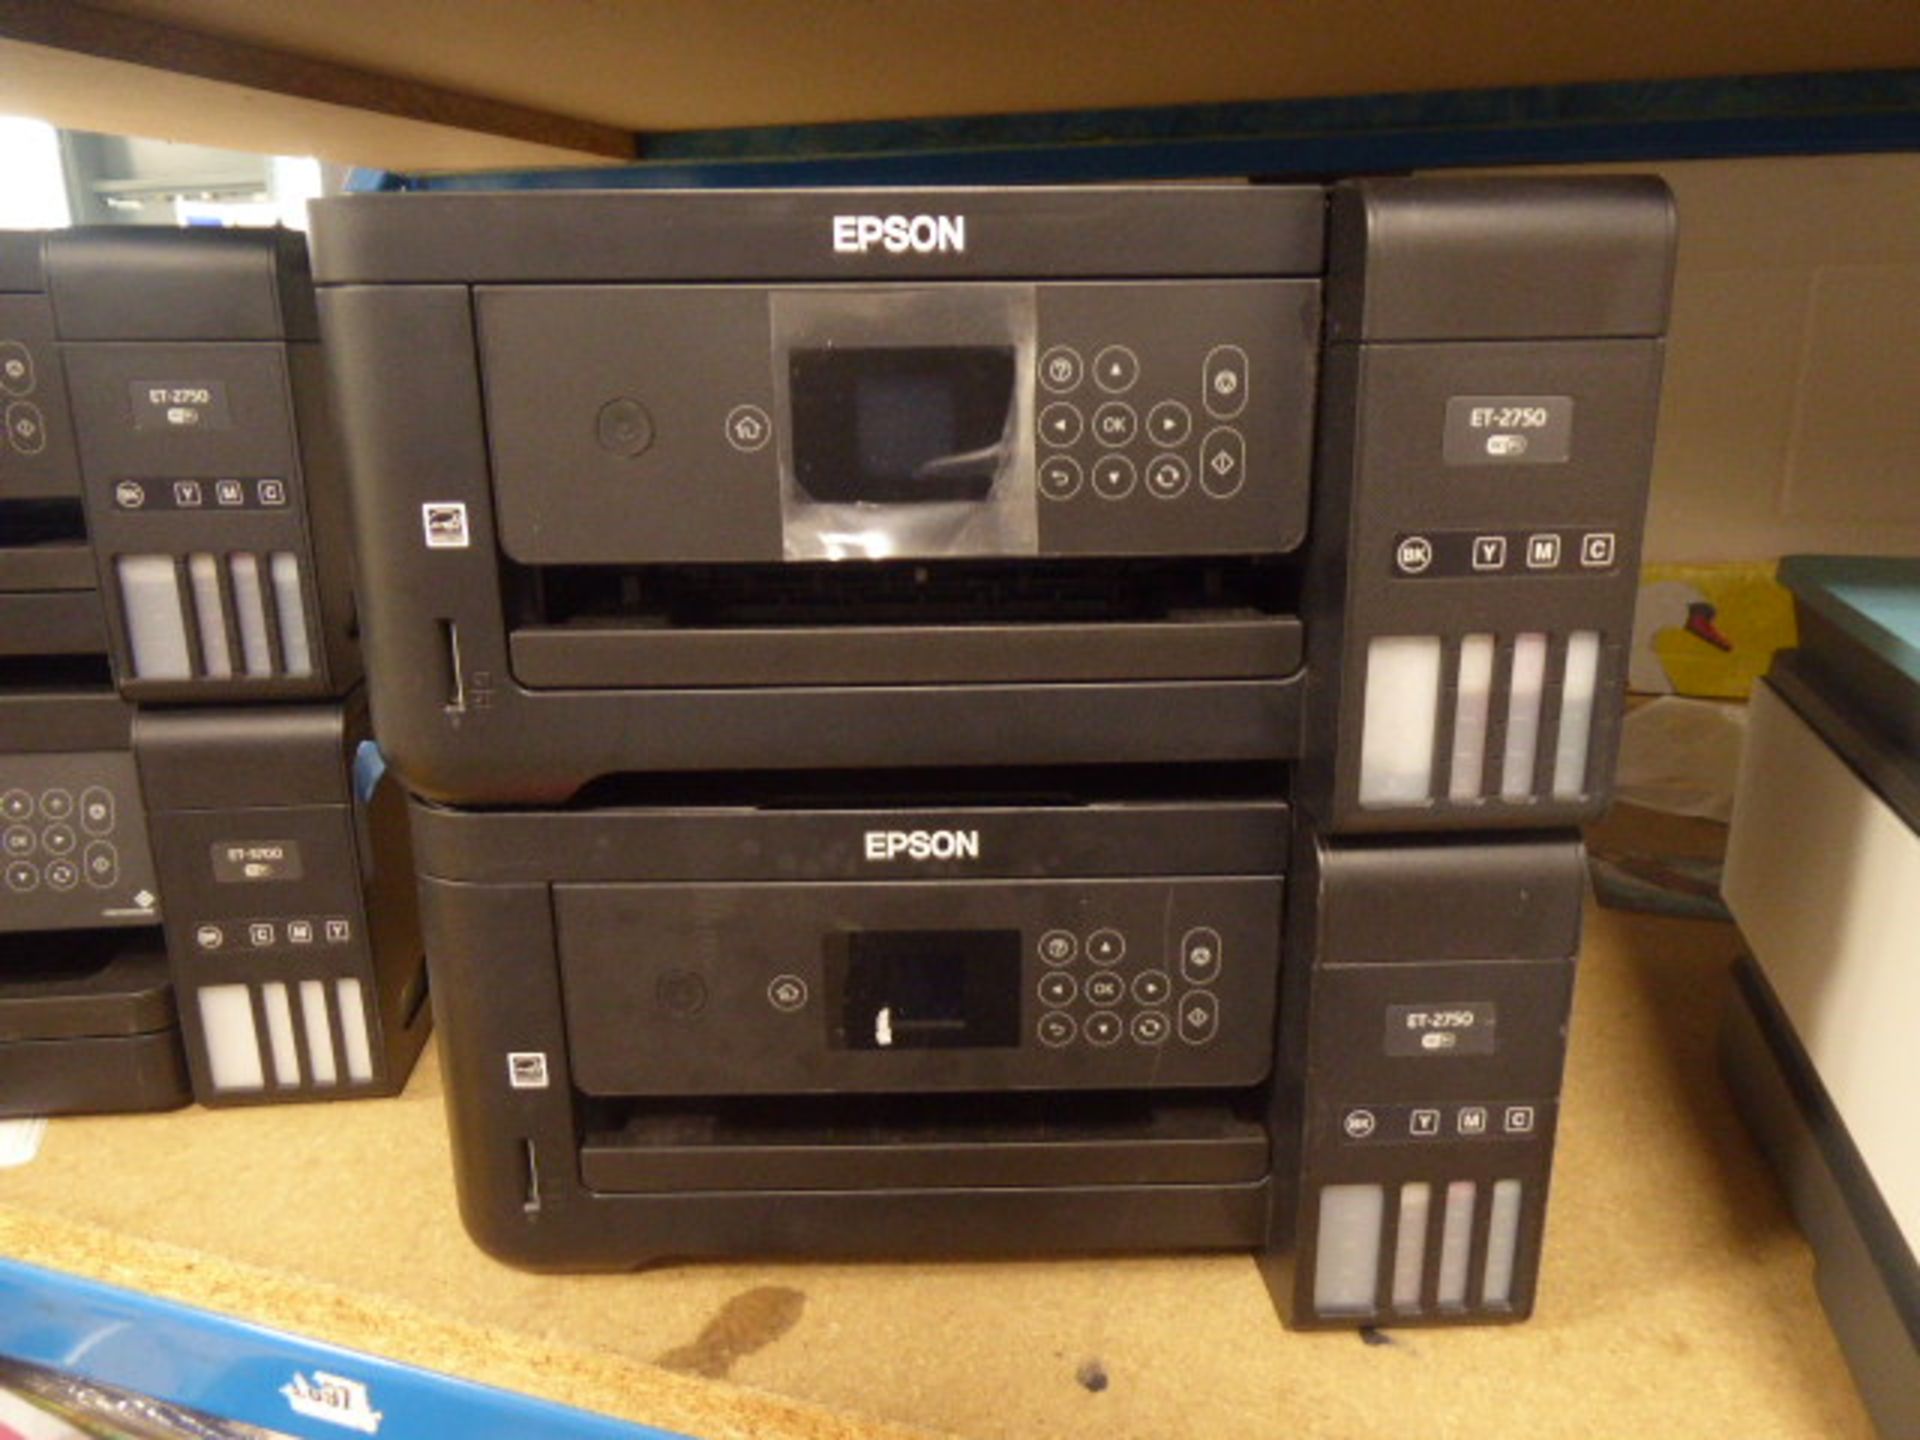 2 Epson ET2750 all in one printers